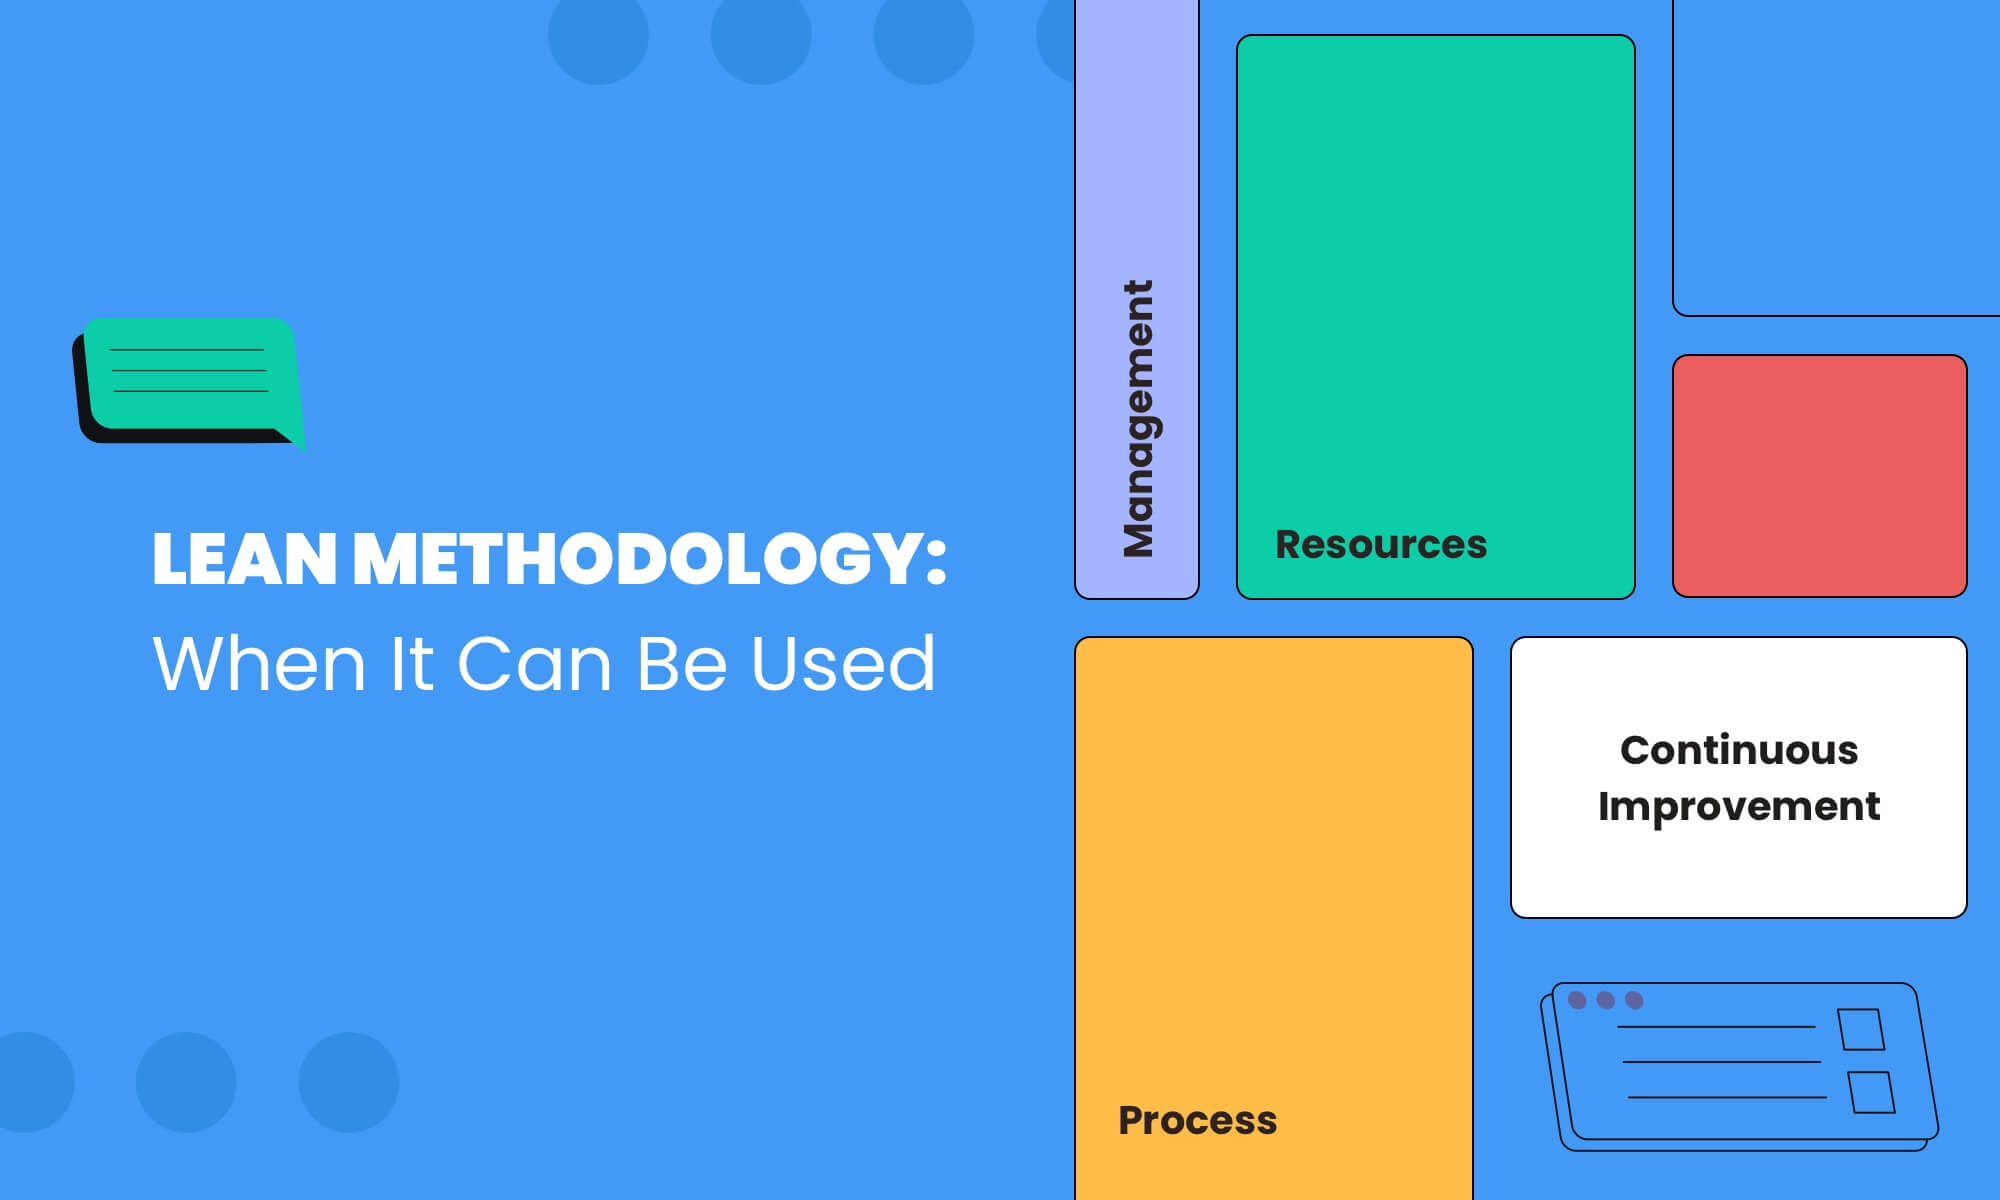  Lean Methodology: When to Use